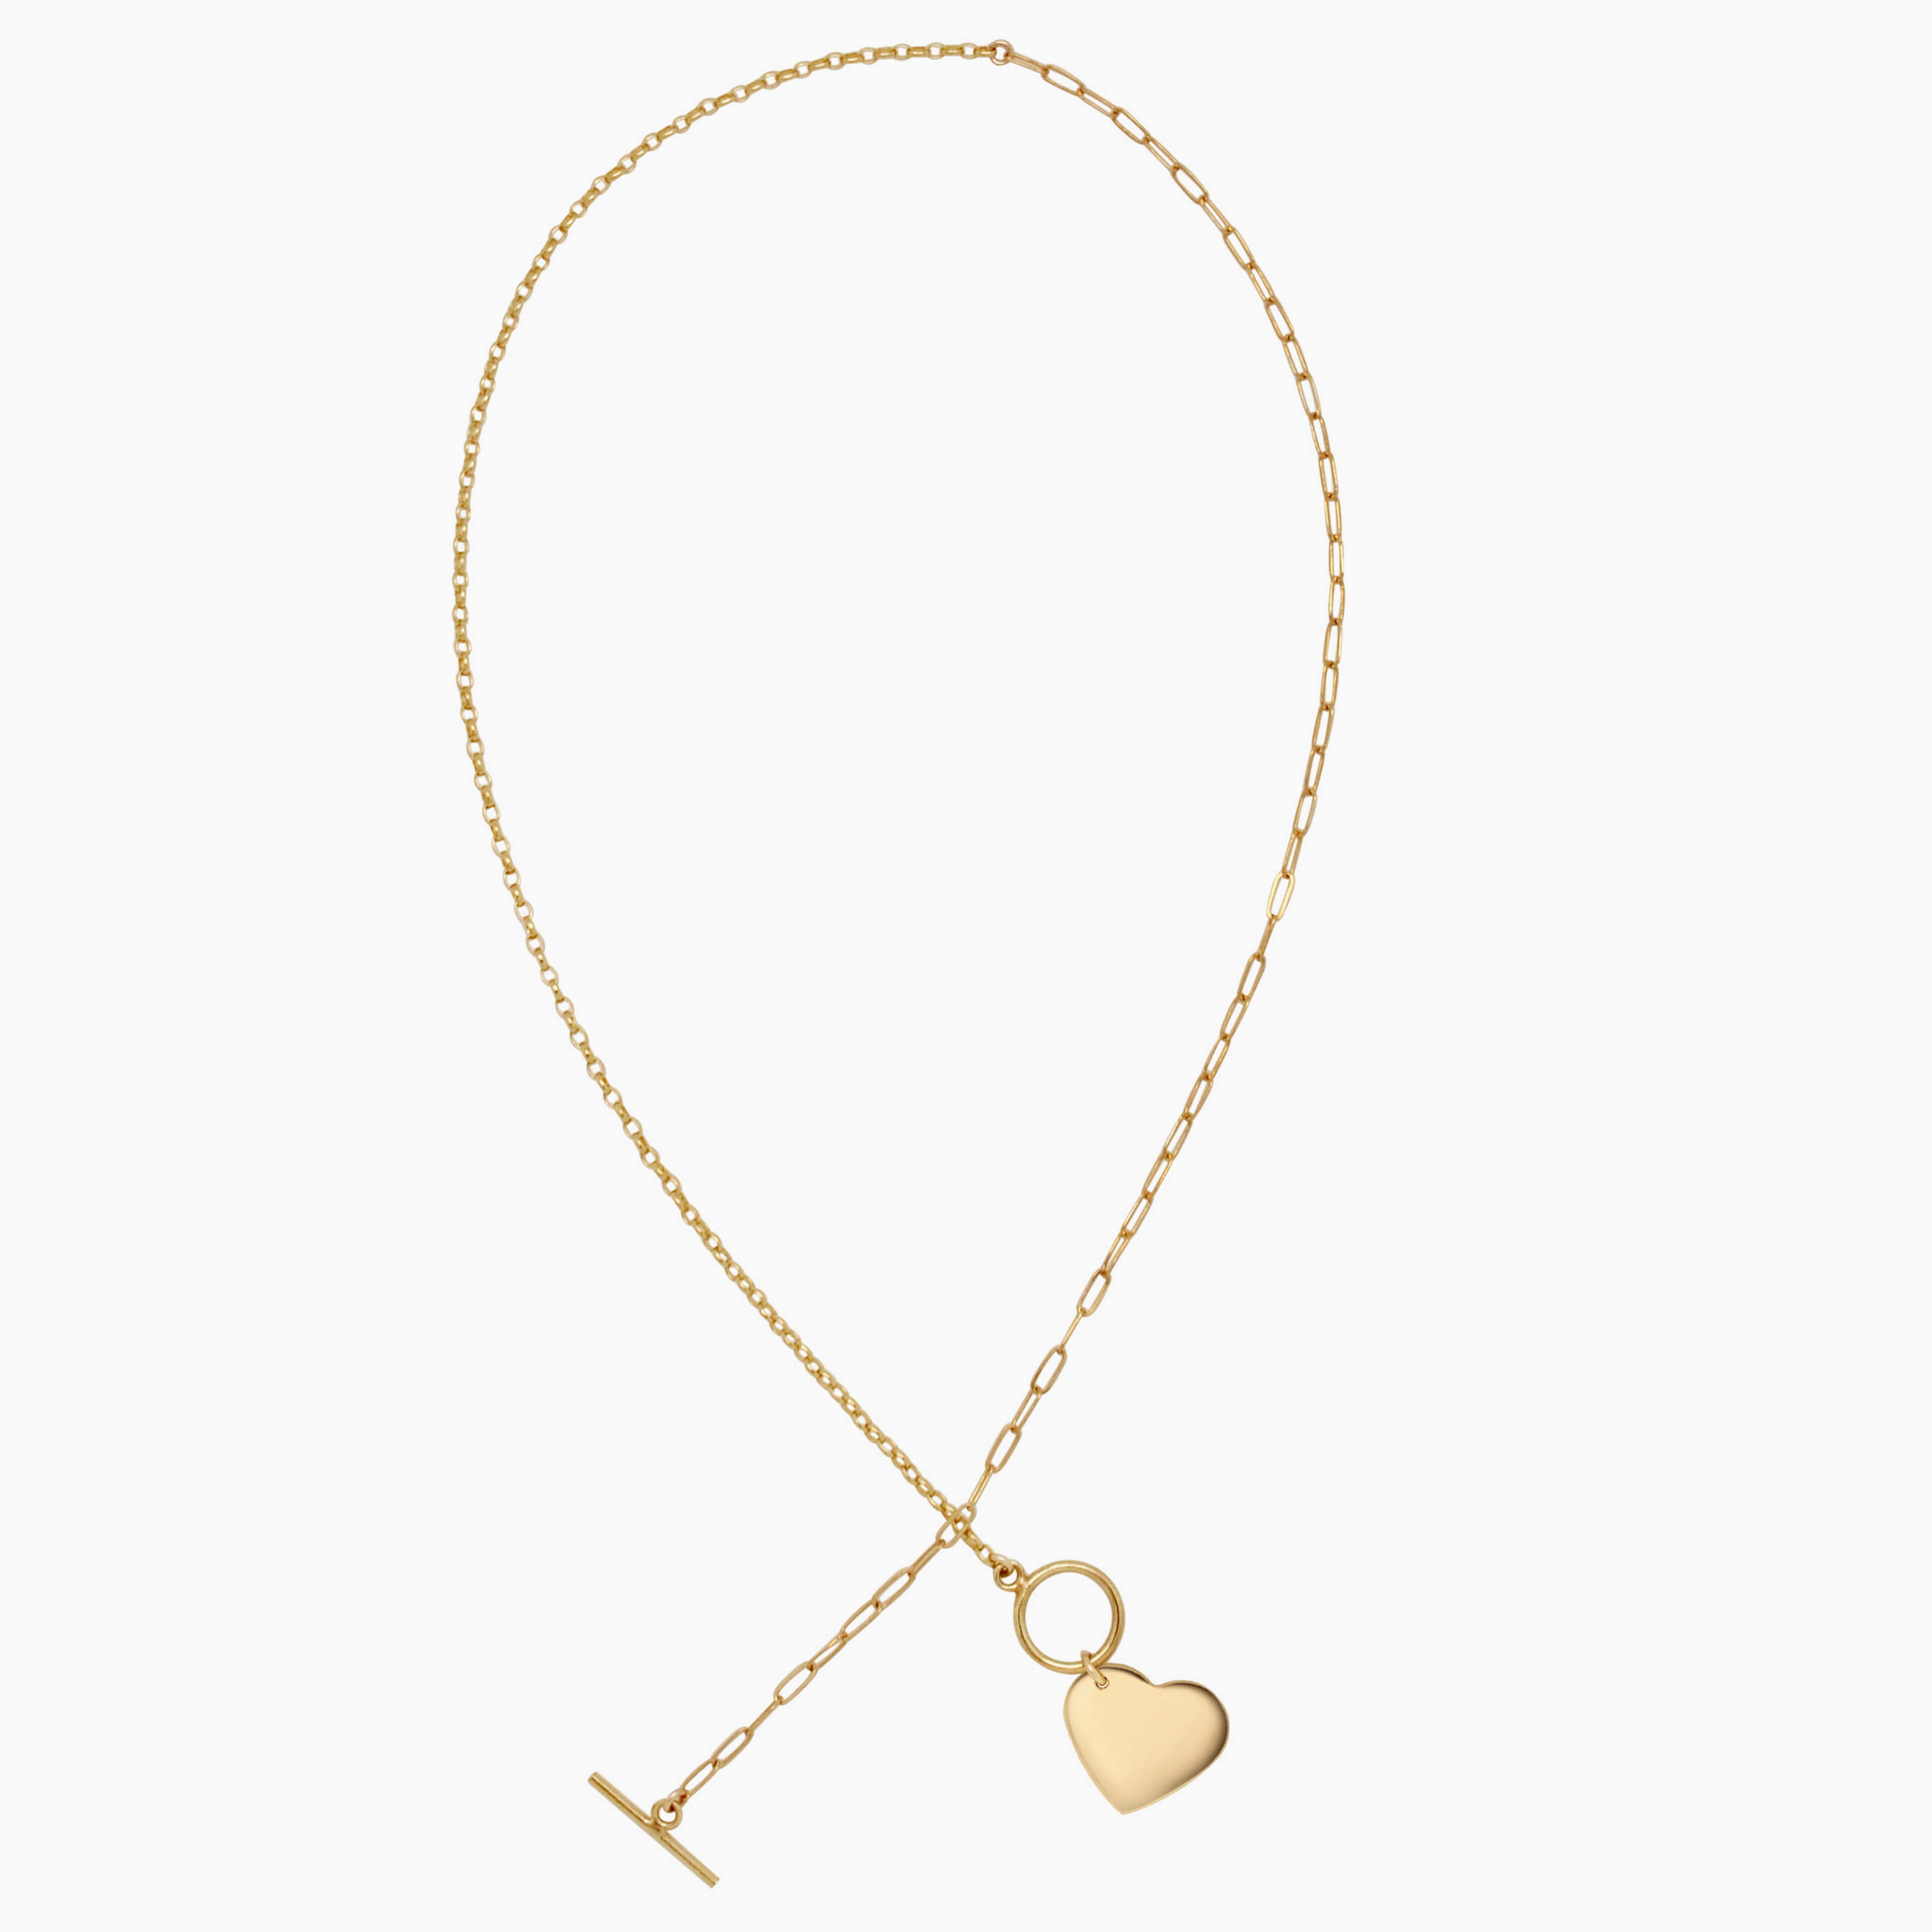 Sweetheart Toggle Necklace